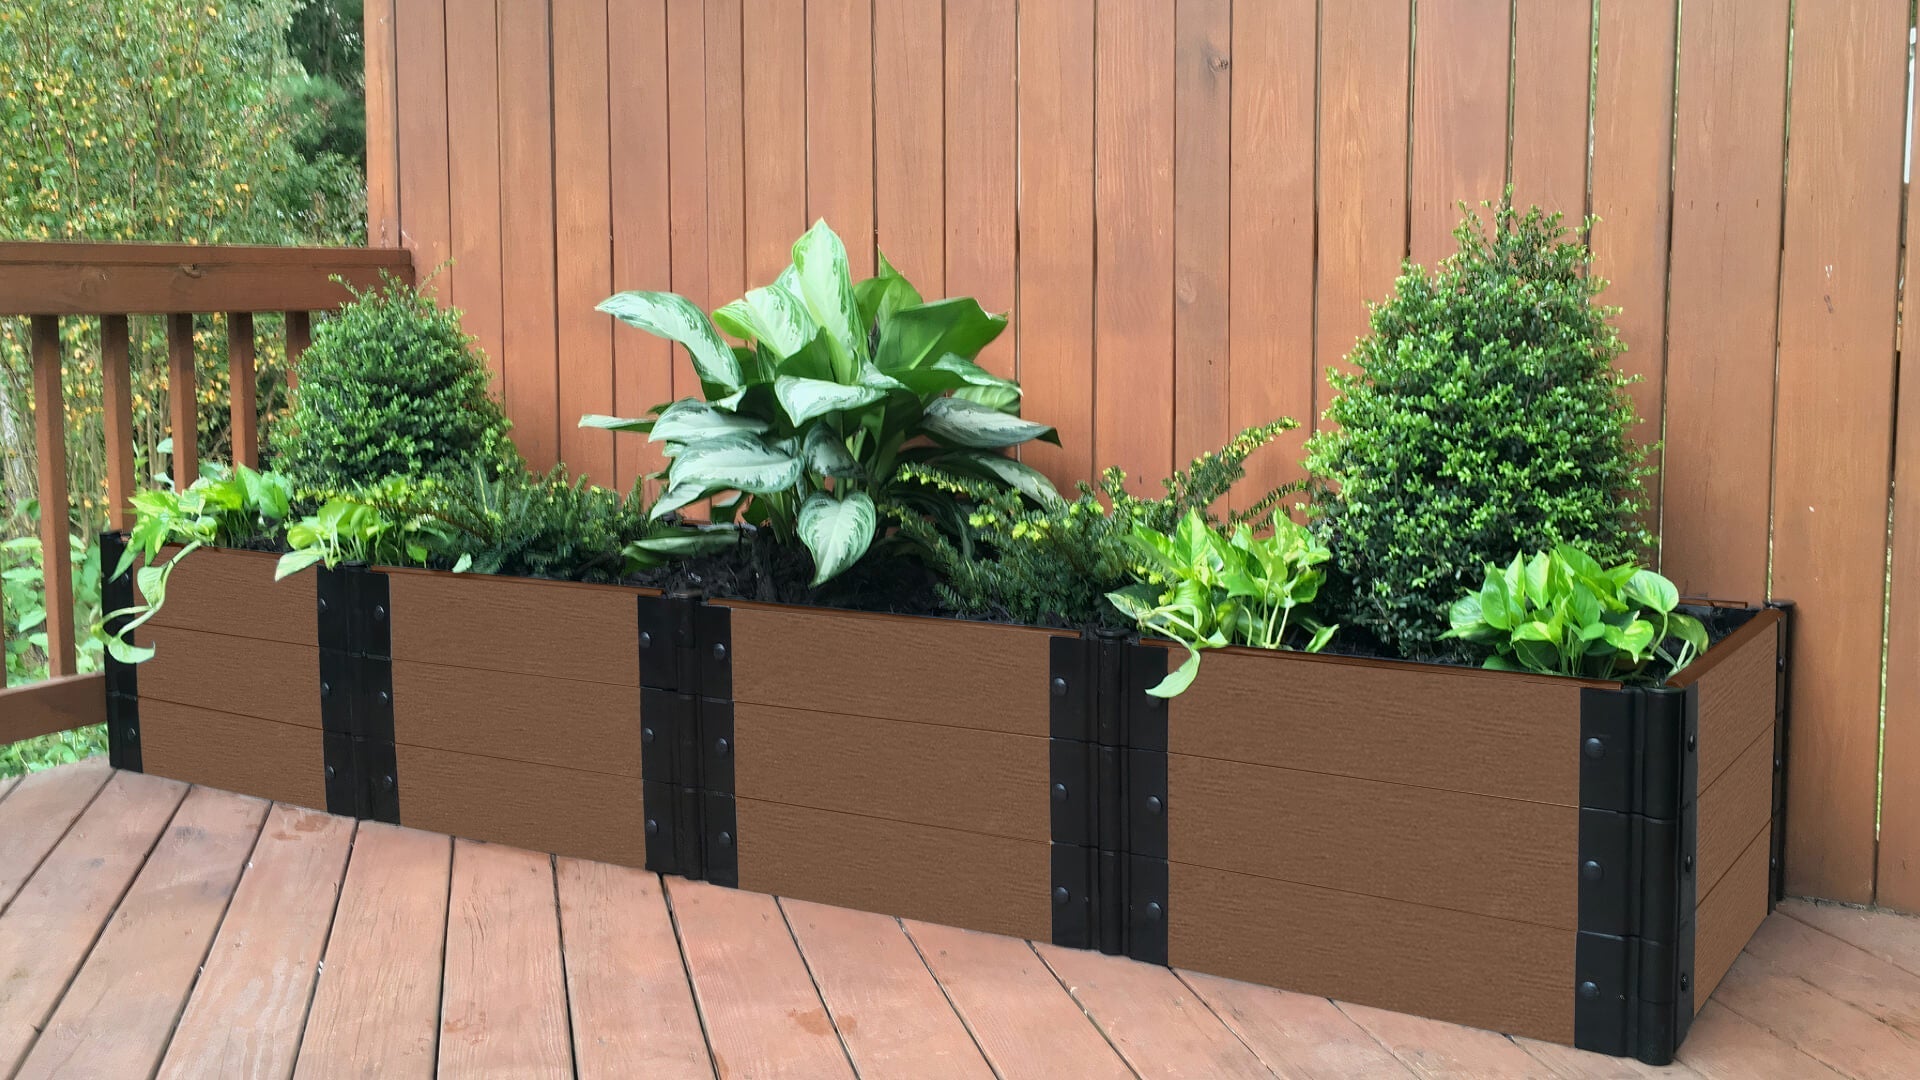 2' x 8' Raised Garden Bed (2' Sections) Raised Bed Planters Frame It All Uptown Brown 1'' 3 = 16.5"